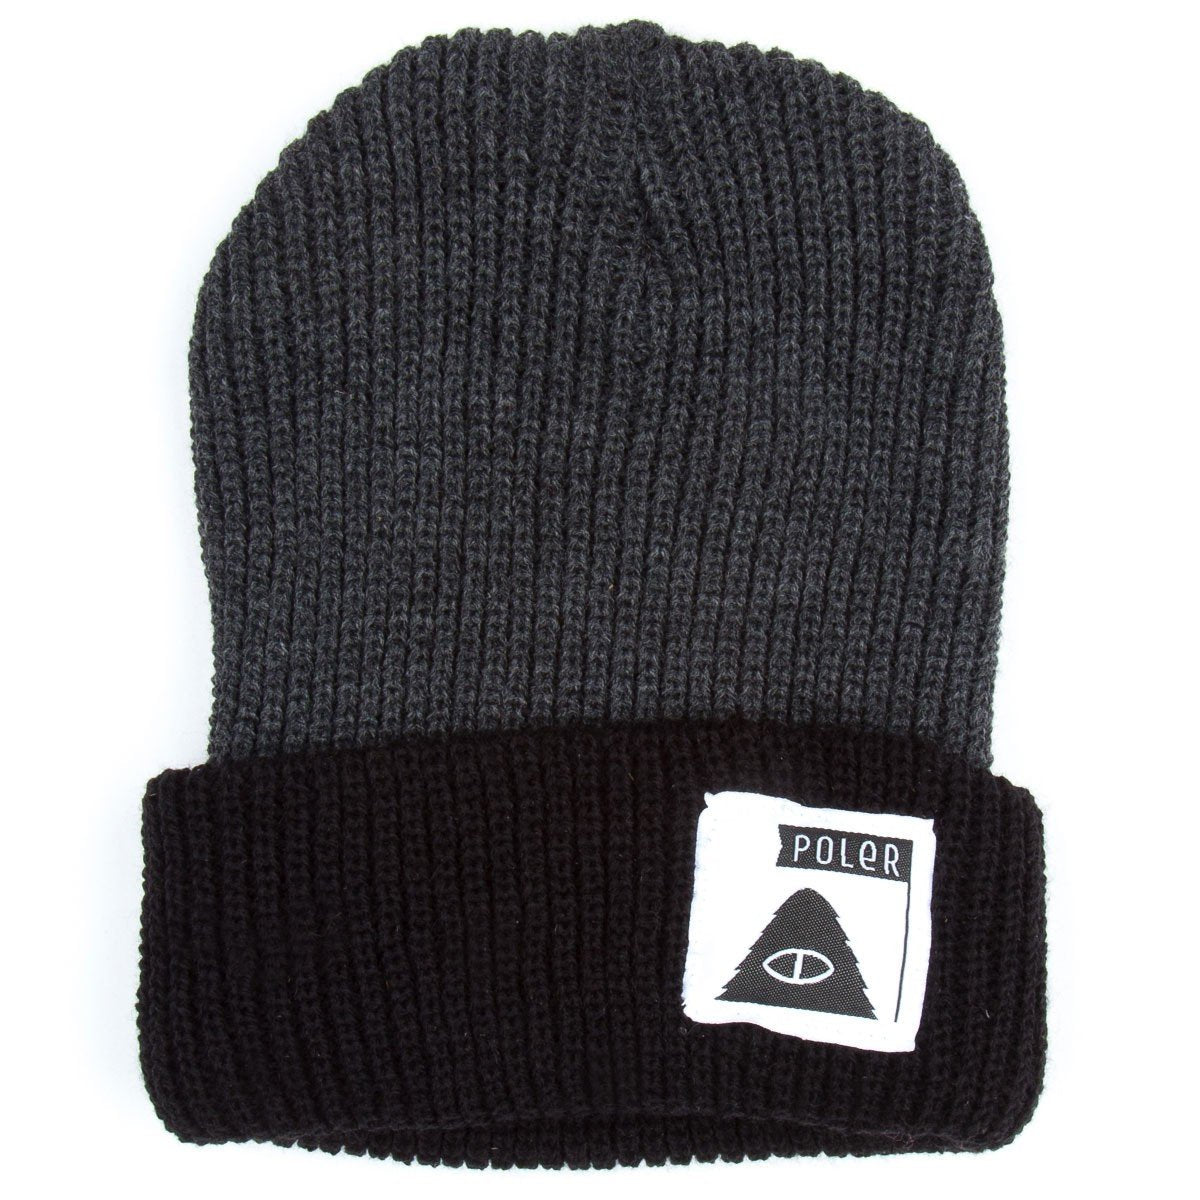 POLER TRAILBOSS BEANIE // CHARCOAL HEATHER-The Collateral